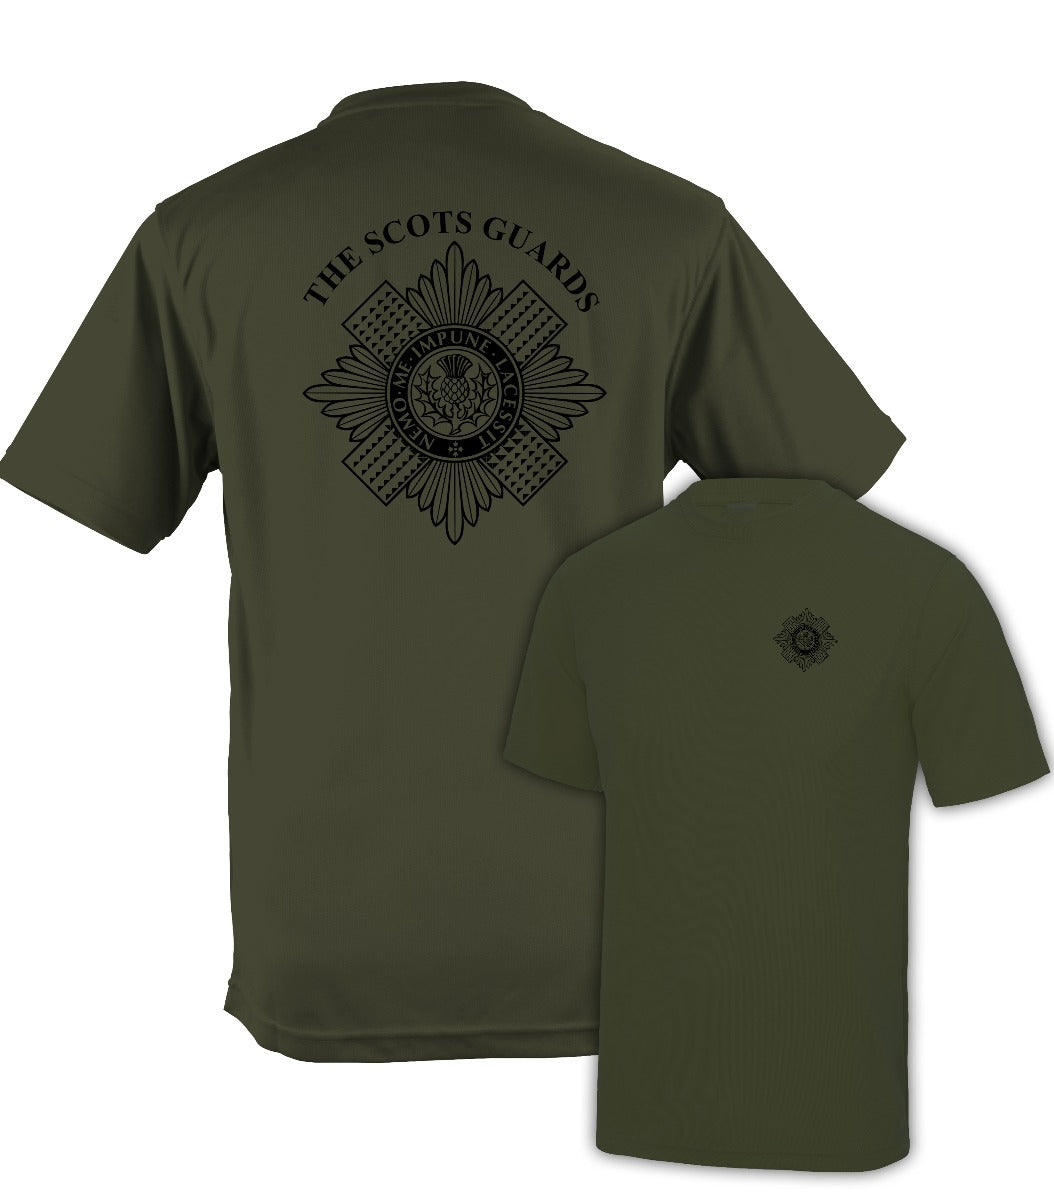 Fully Printed The Scots Guards (SG) Wicking Fabric T-shirt